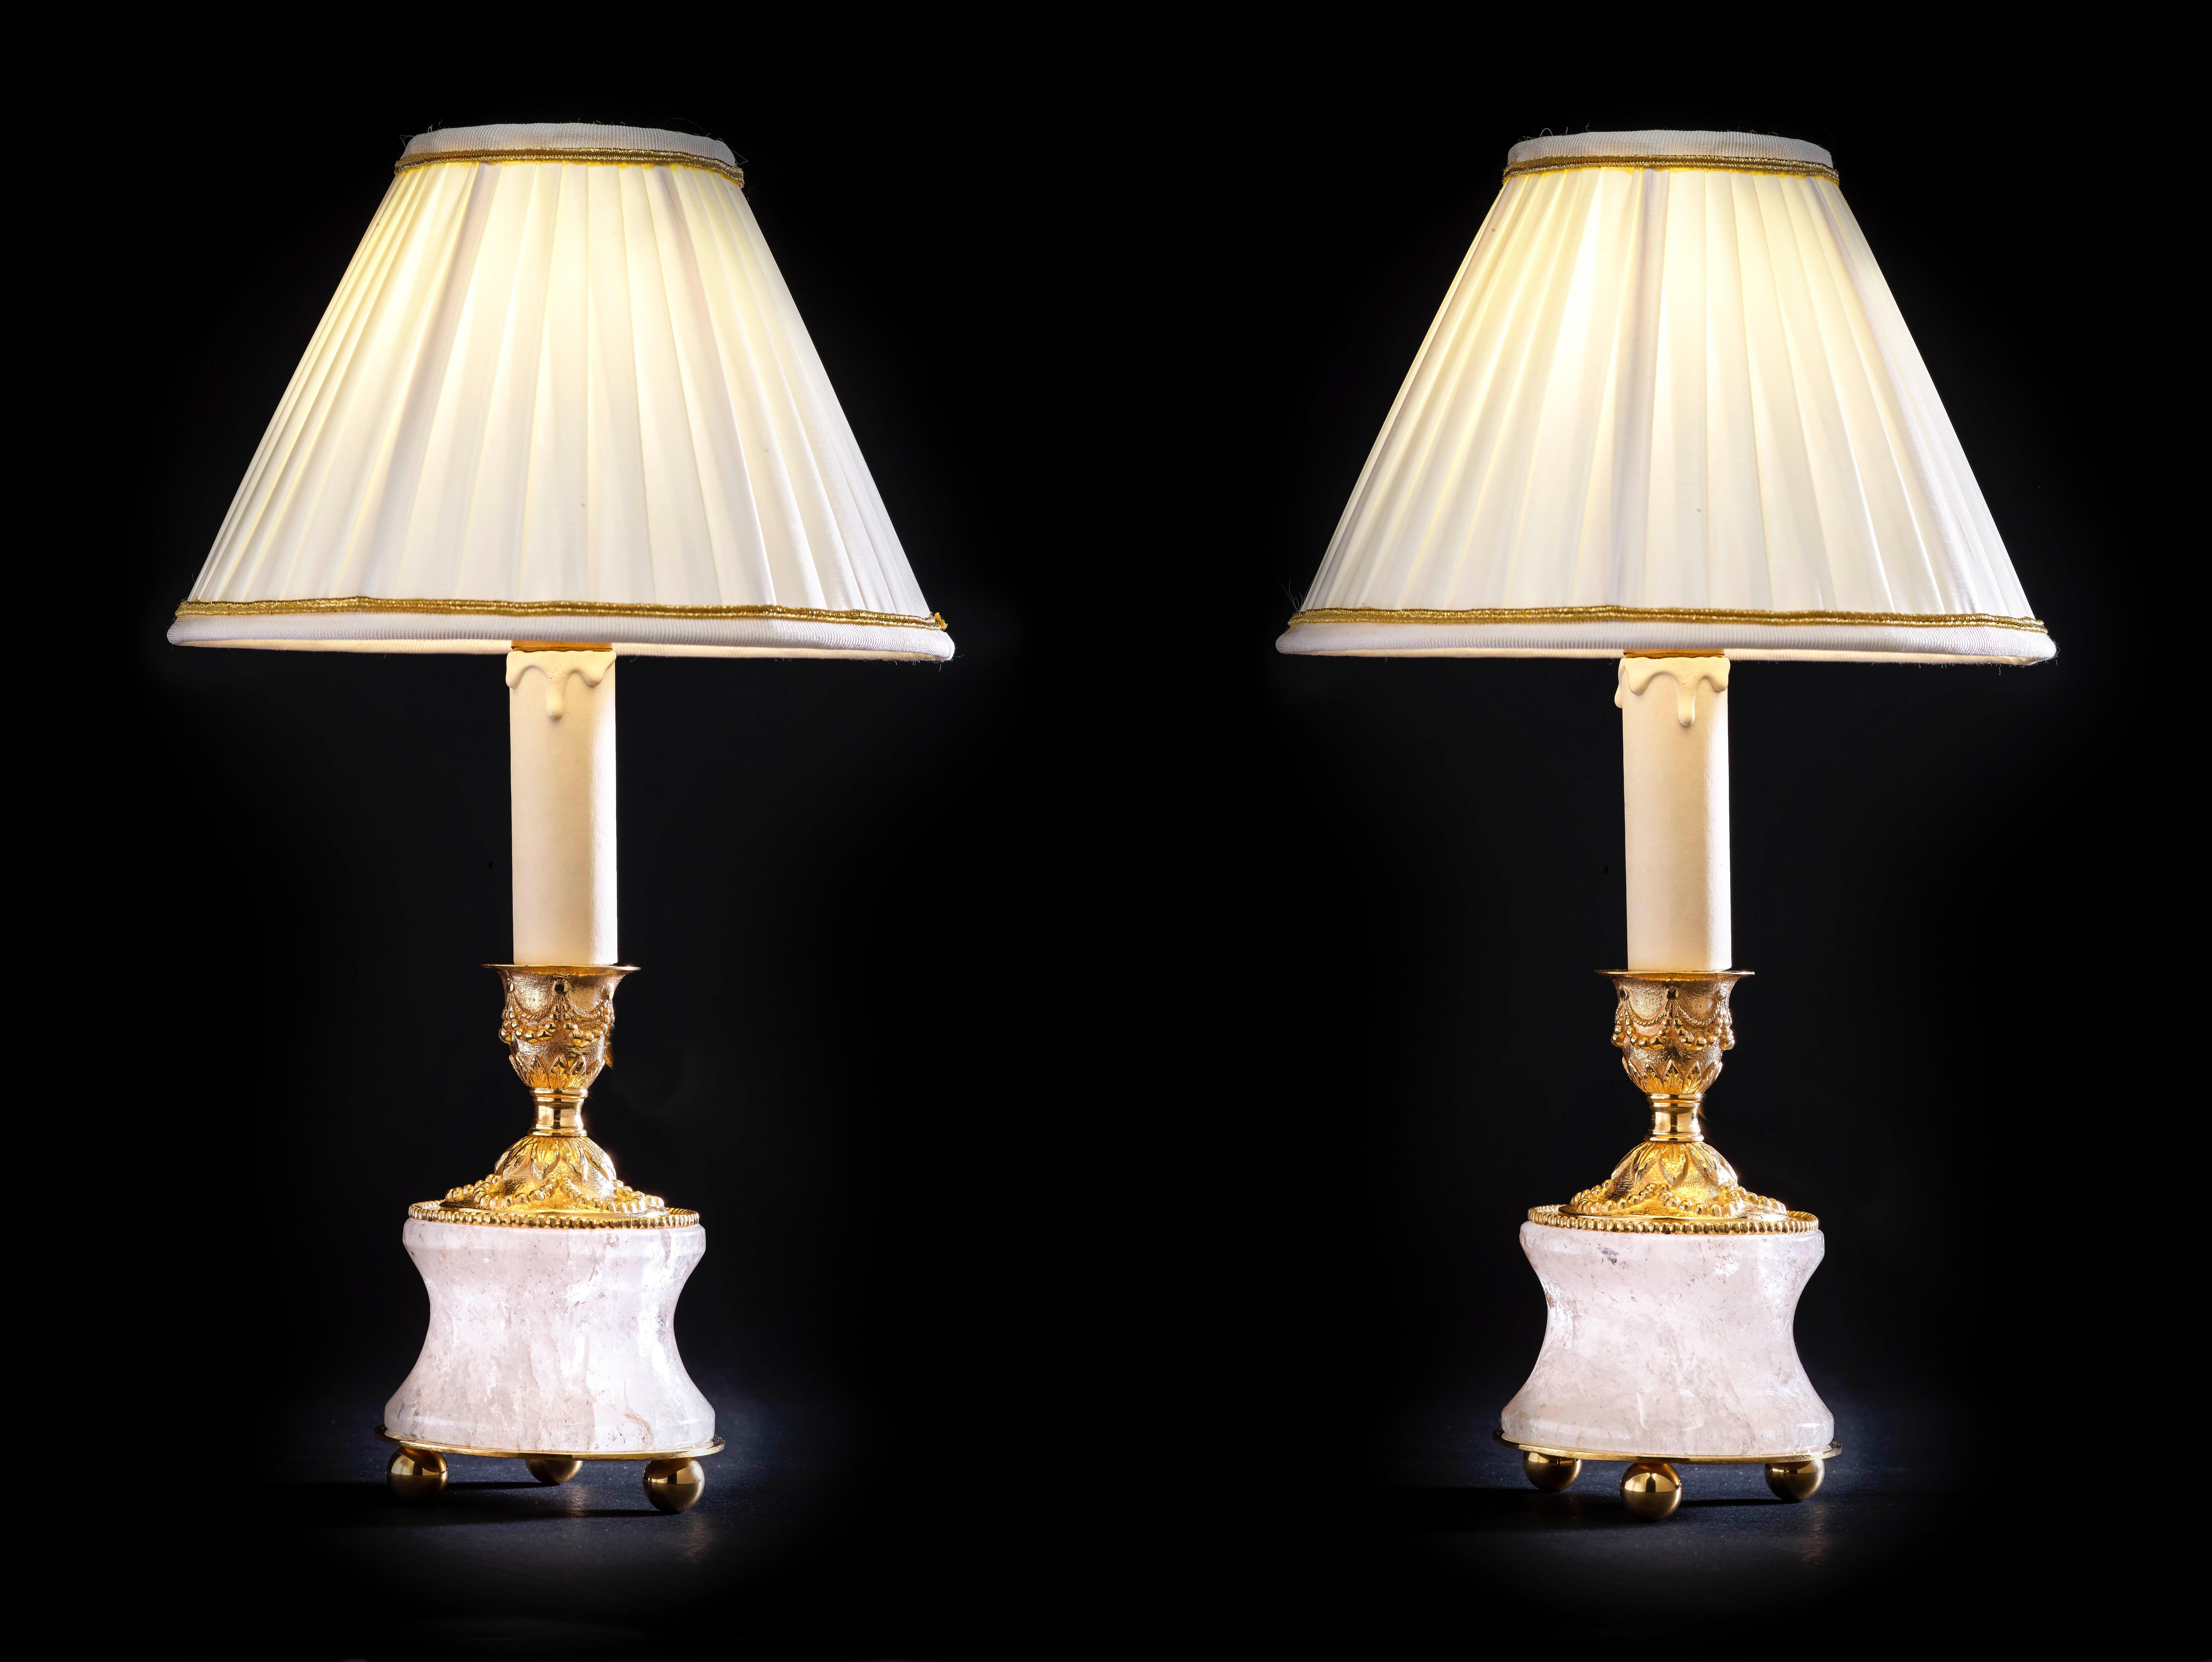 Rock crystal Louis XVI style 24-karat ormolu gilding bronze Ivory lampshades made by Alexandre Vossion.
This model can be also used as candlesticks to make your dining table so chic...
Others colors for the lampshades are also available and three